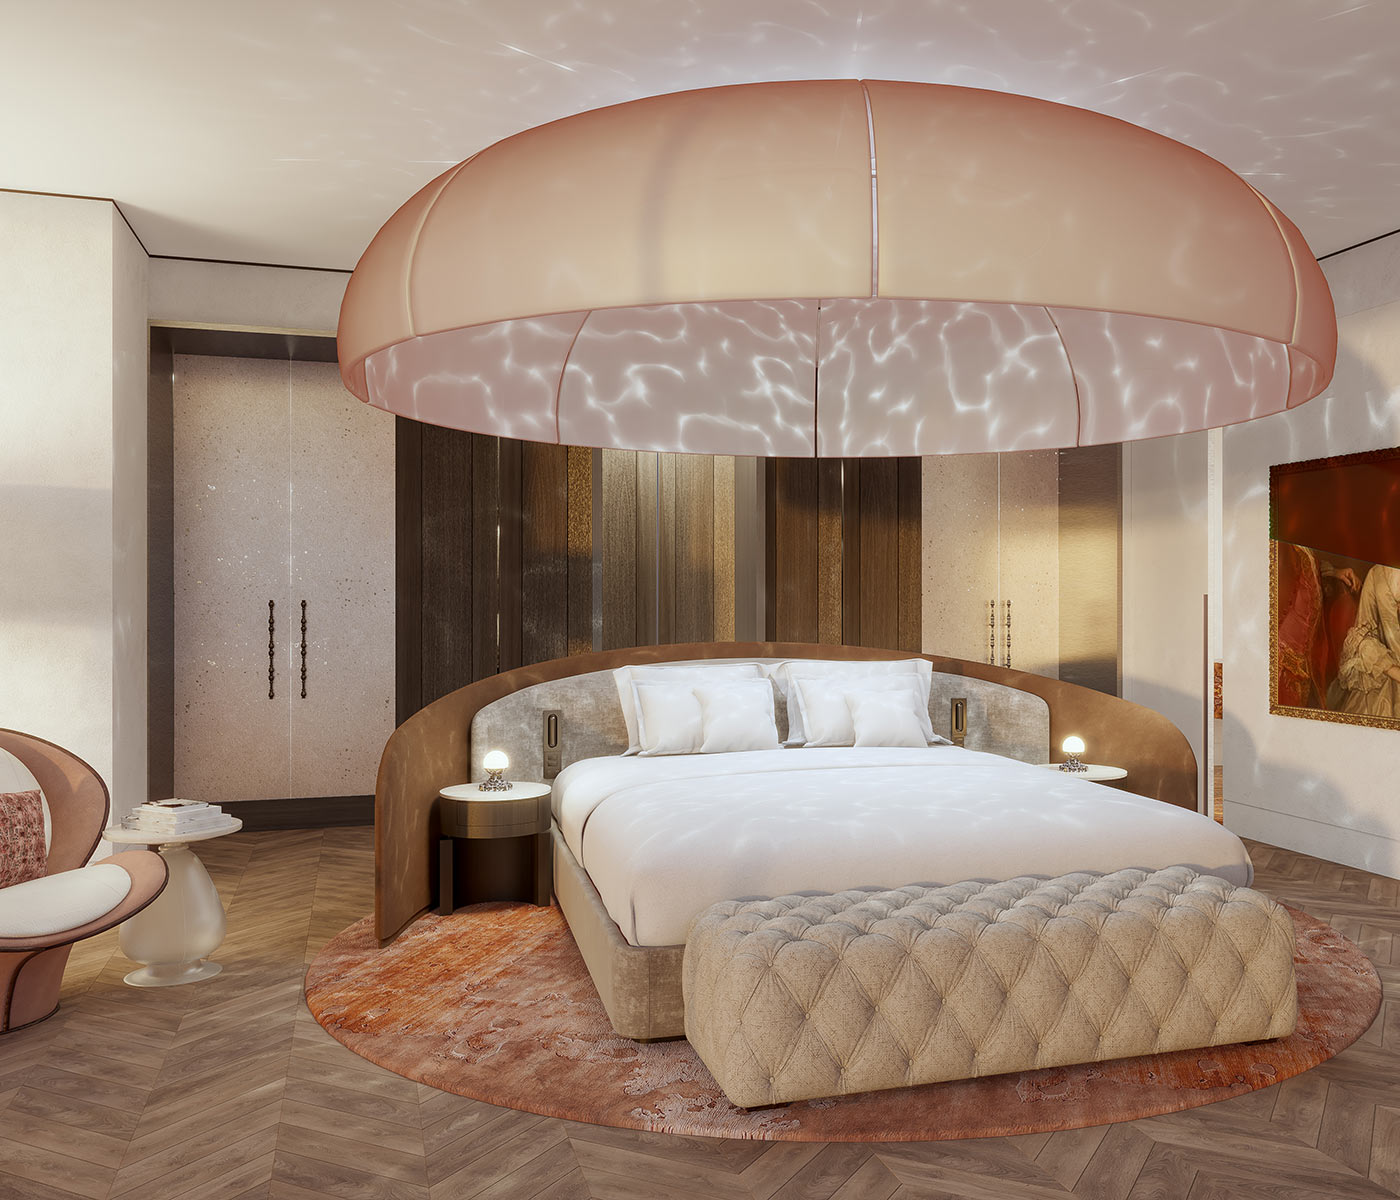 Bedroom in a hotel suite with a large circular lighting fixture hung over the king-size bed, and a tufted bench at the foot of the bed